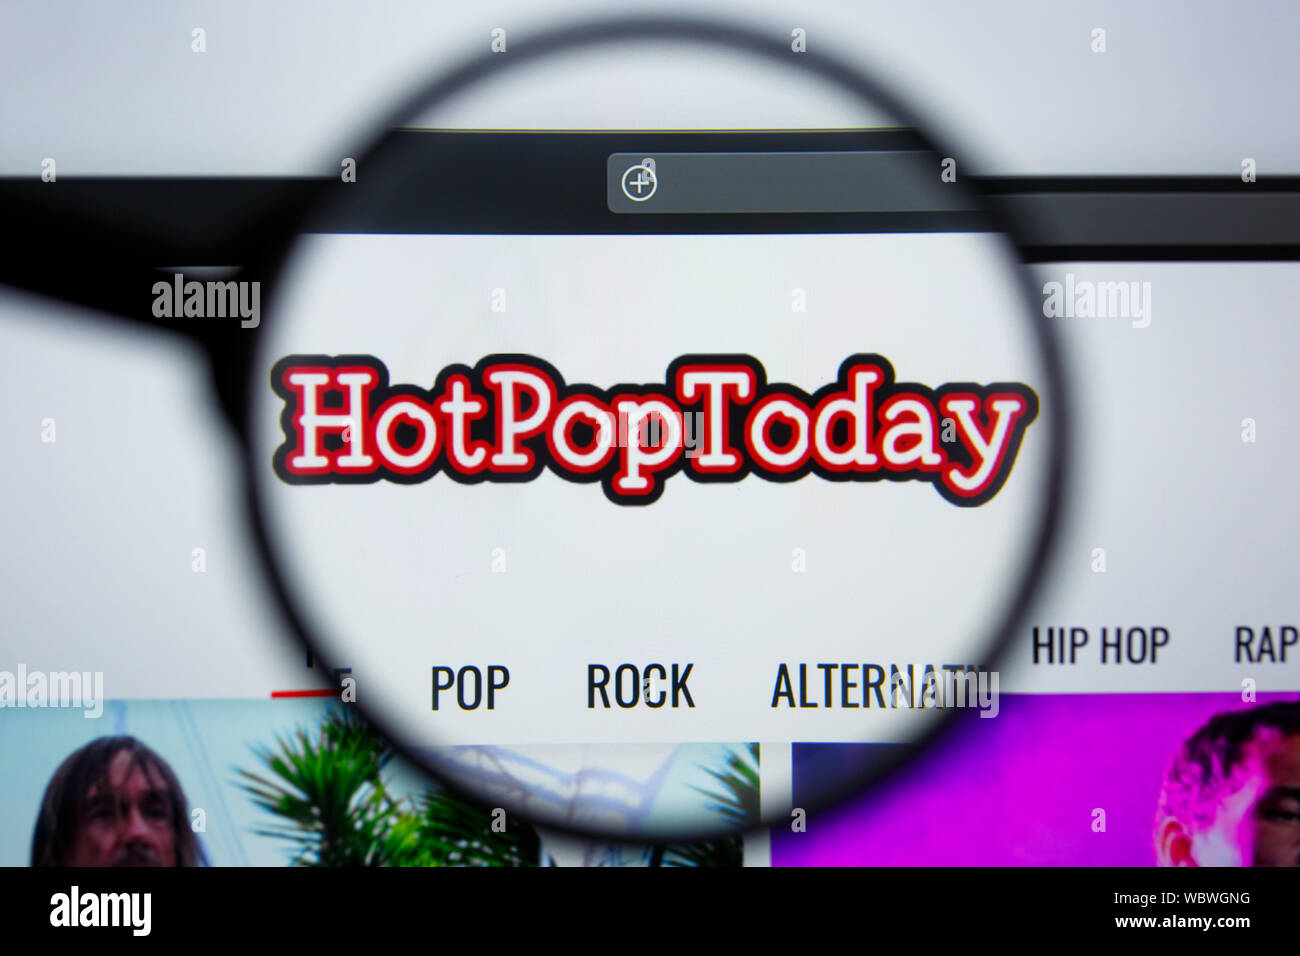 Los Angeles, California, USA - 21 Jule 2019: Illustrative Editorial of  HOTPOPTODAY.COM website homepage. HOT POP TODAY logo visible on display  screen Stock Photo - Alamy